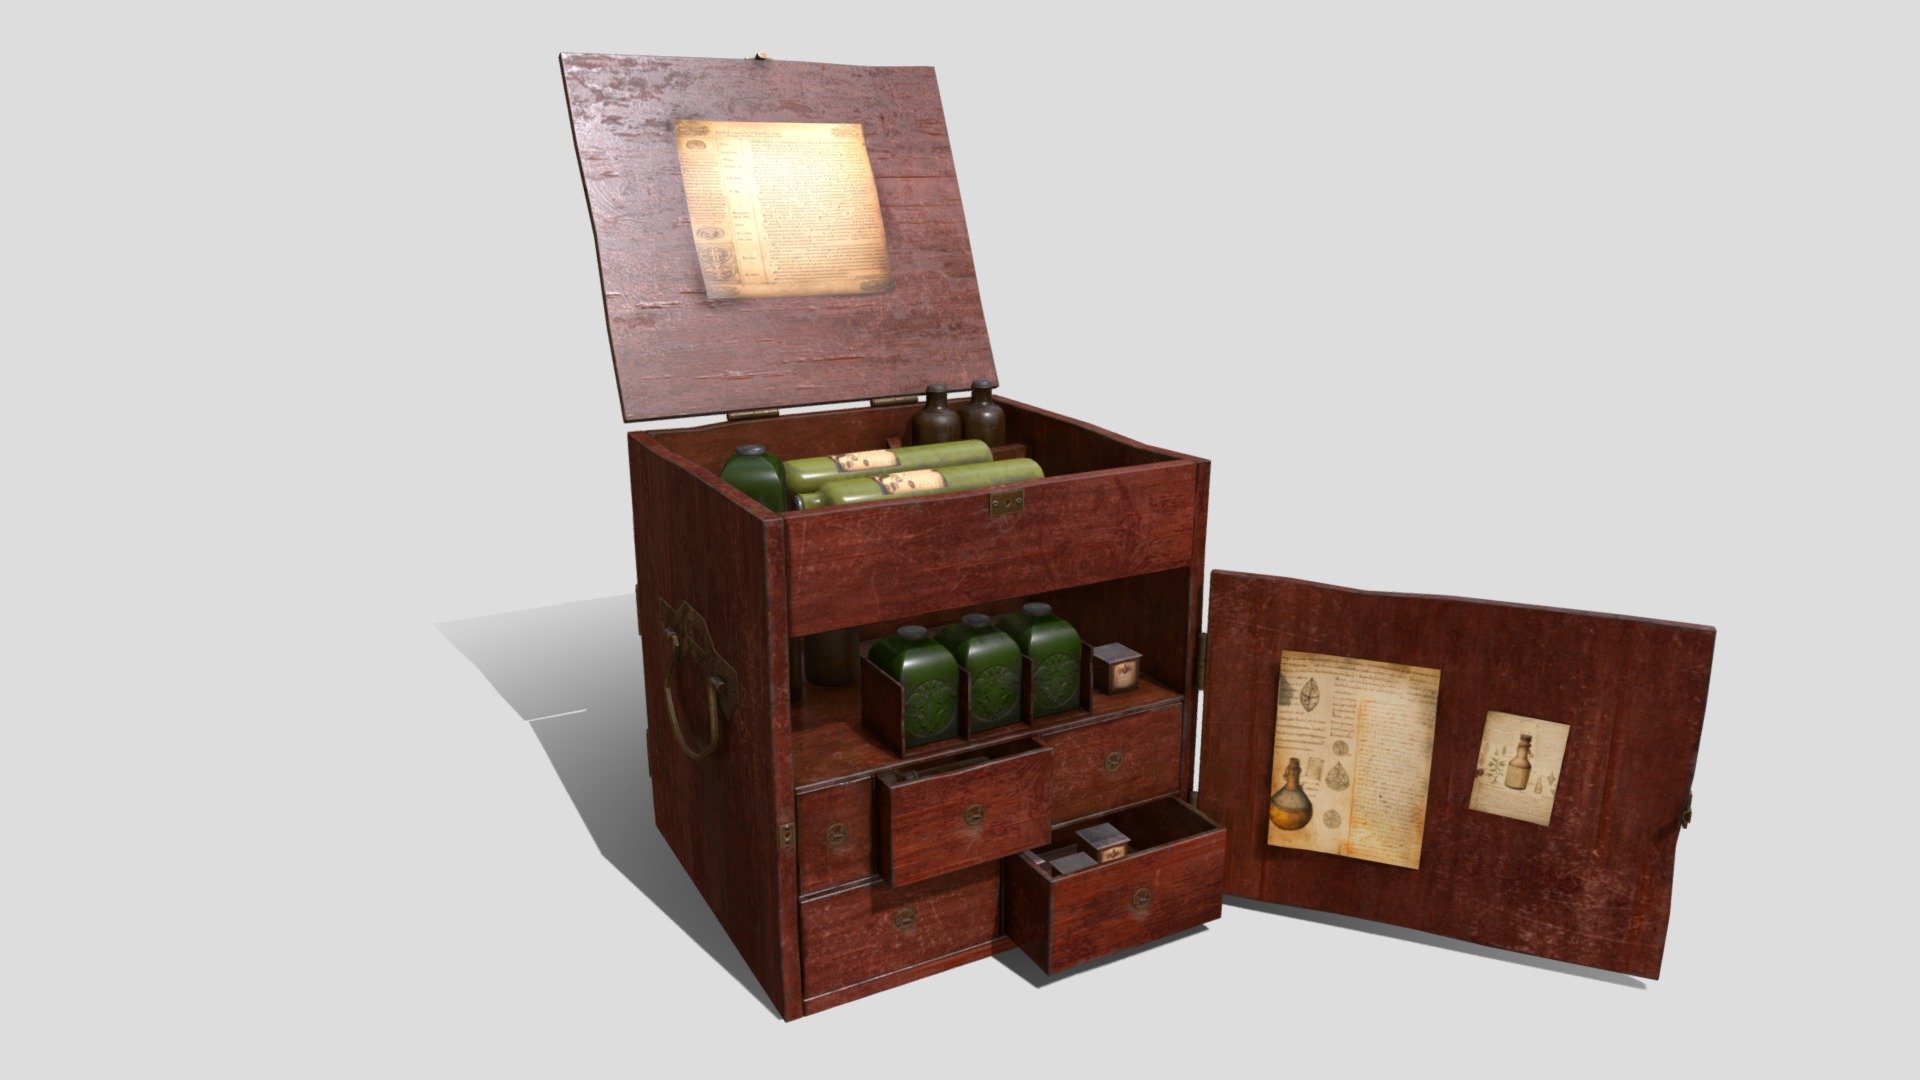 NoAI: This model may not be used in datasets for, in the development of, or as inputs to generative AI programs.

Key Features:

🔮 Magical Design: Intricately crafted, this model captures the enchanting essence of a potion box suitable for both witches and wizards.

📸 PBR Textures: Utilizes high-quality PBR textures for a realistic wood finish and aged metallic details, providing a rich visual experience.

✨ Fantasy Setting: A must-have for any magical or fantasy-oriented scene, adding an extra layer of detail and wonder to your visual storytelling.

🎮 Versatile Use: Ideal for RPGs, interactive storytelling, or fantasy architectural visualizations, offering endless narrative possibilities.

Immerse yourself in a world of magical possibilities with this Witch &amp; Wizard Potion Box. A captivating addition to your fantastical 3D scenes! - Witch & Wizard Potion Box 🧙‍♂️ - Buy Royalty Free 3D model by Glowbox 3D (@glowbox3d) 3d model